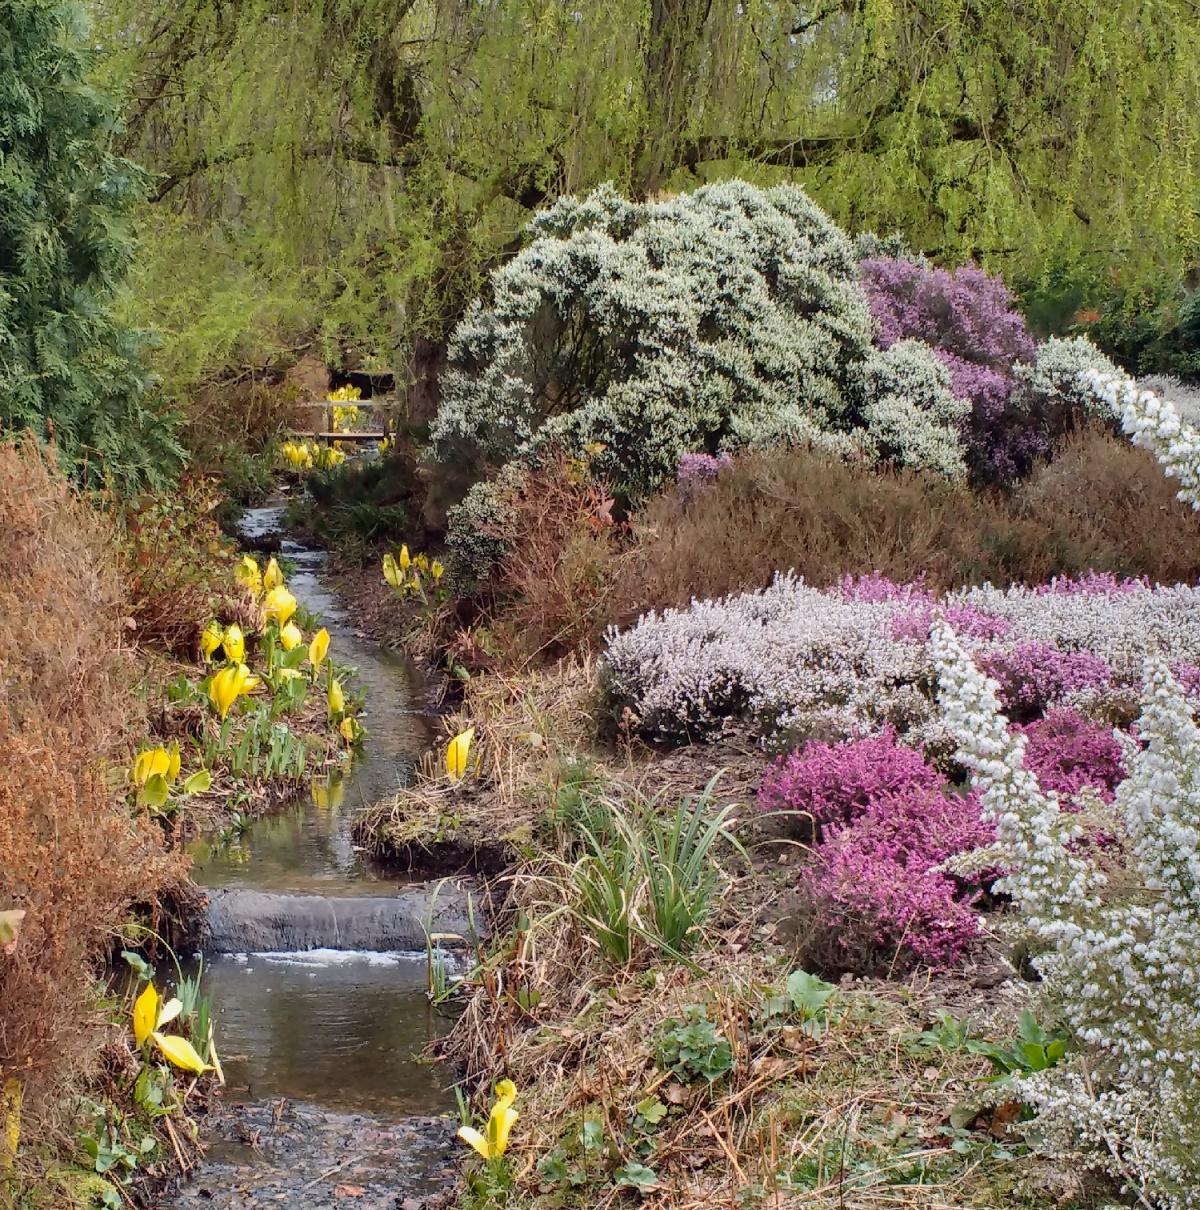 Andy Scott sent in this photo of a heather garden in the Isabella Plantation in Richmond Park